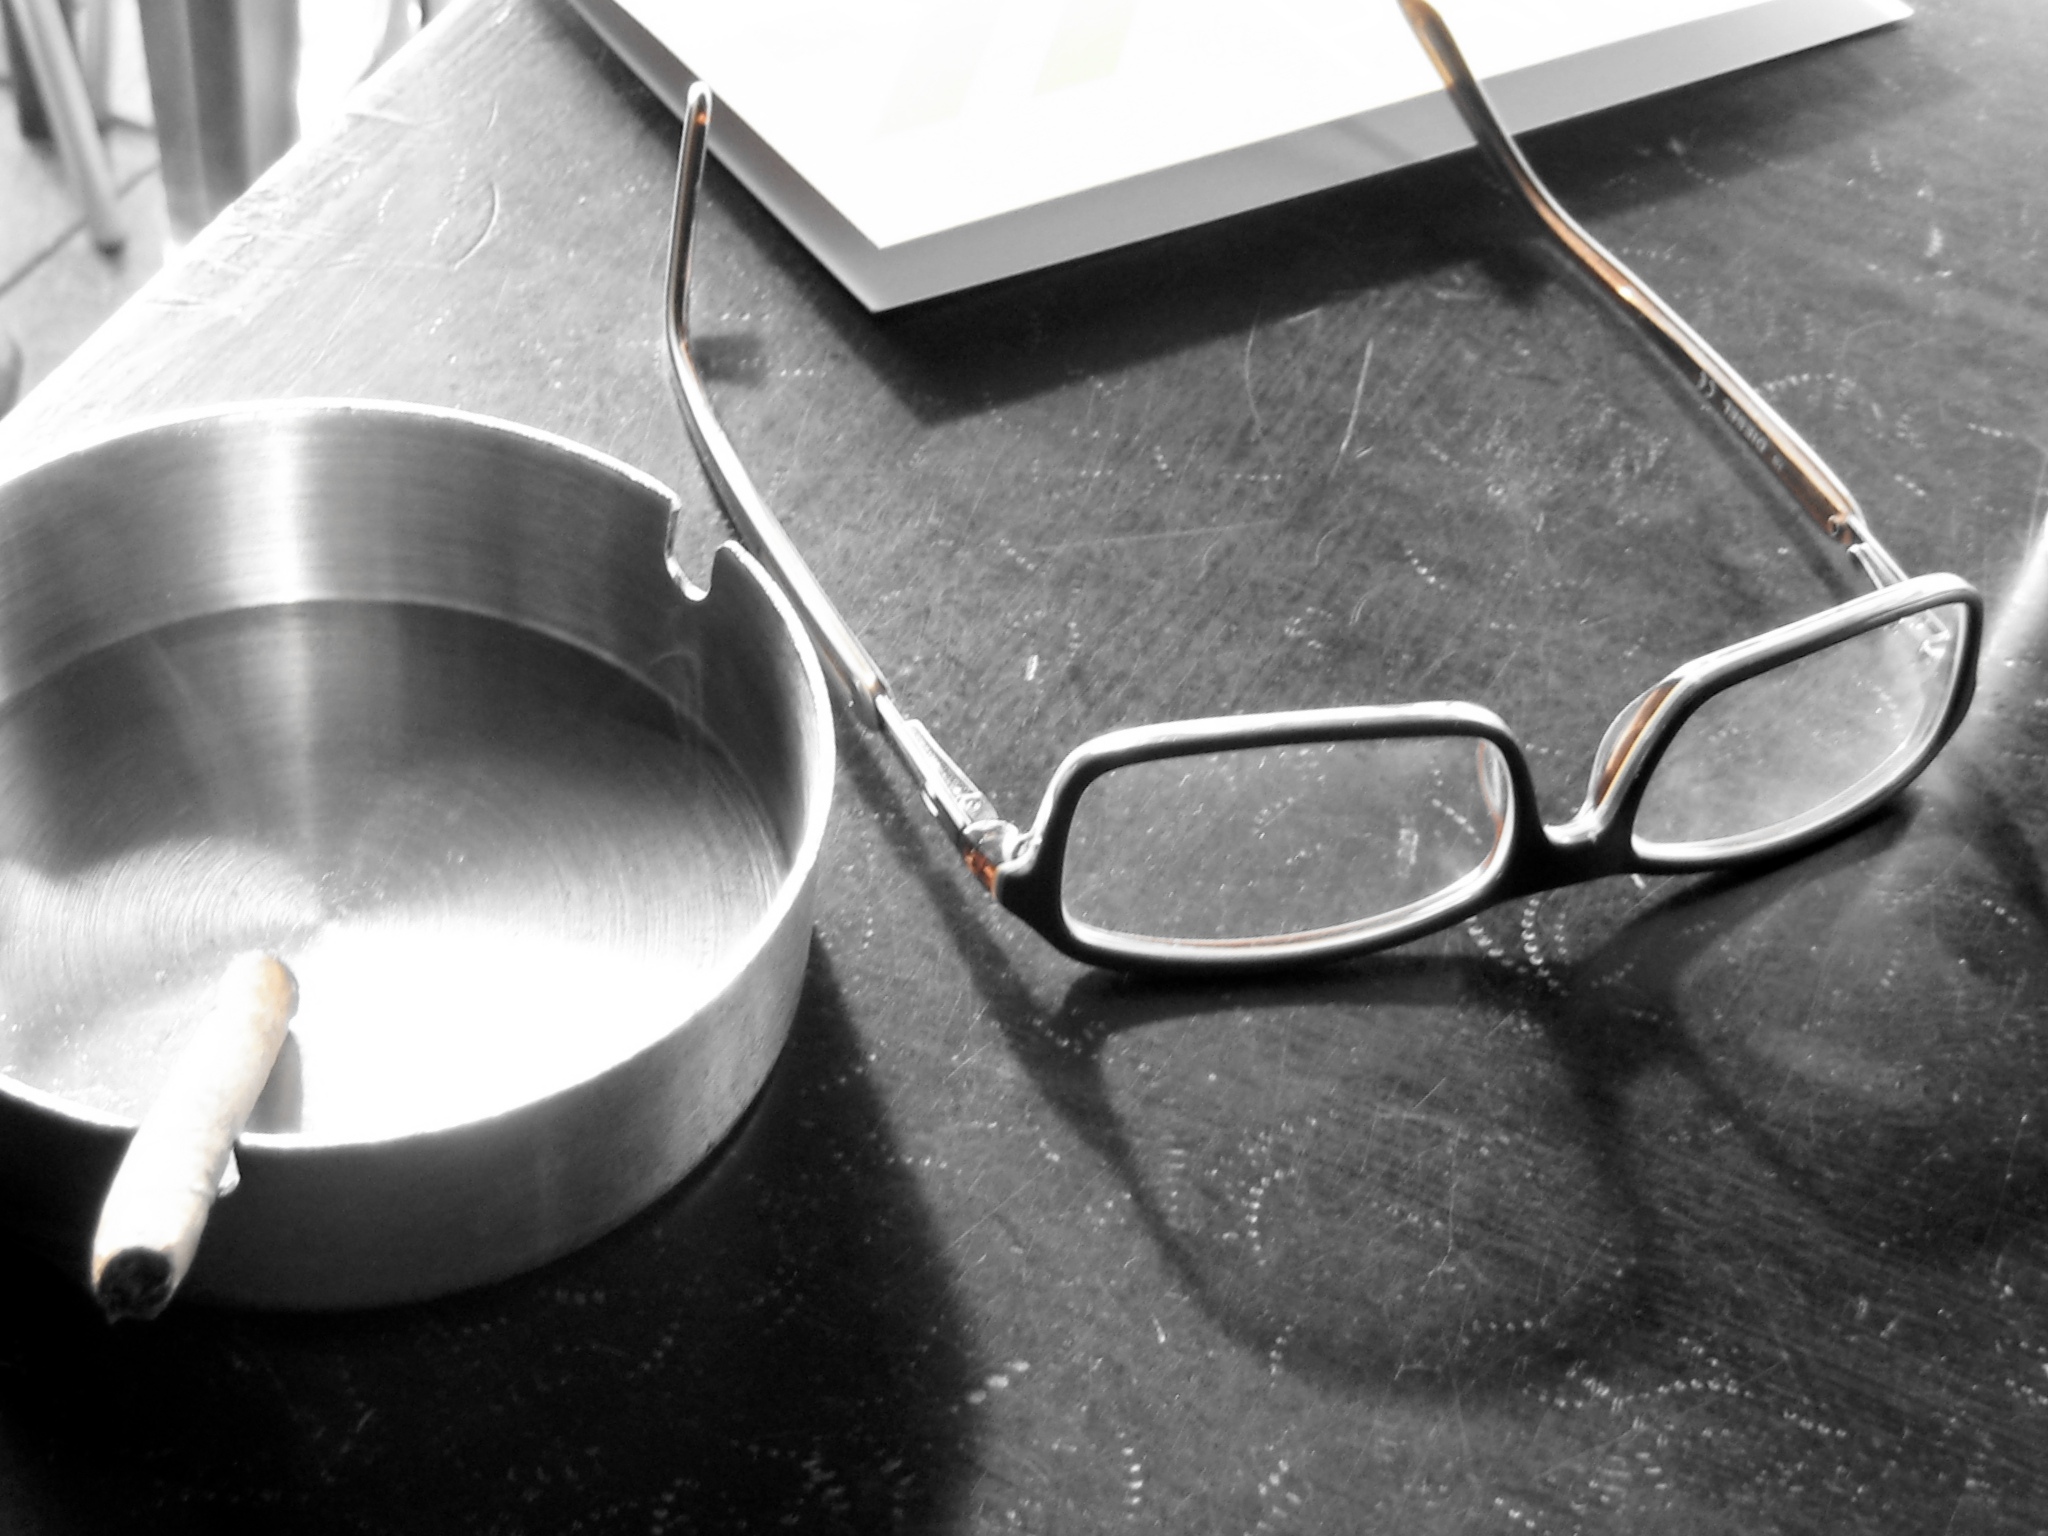 an eyeglass sitting next to a frying pan on a table